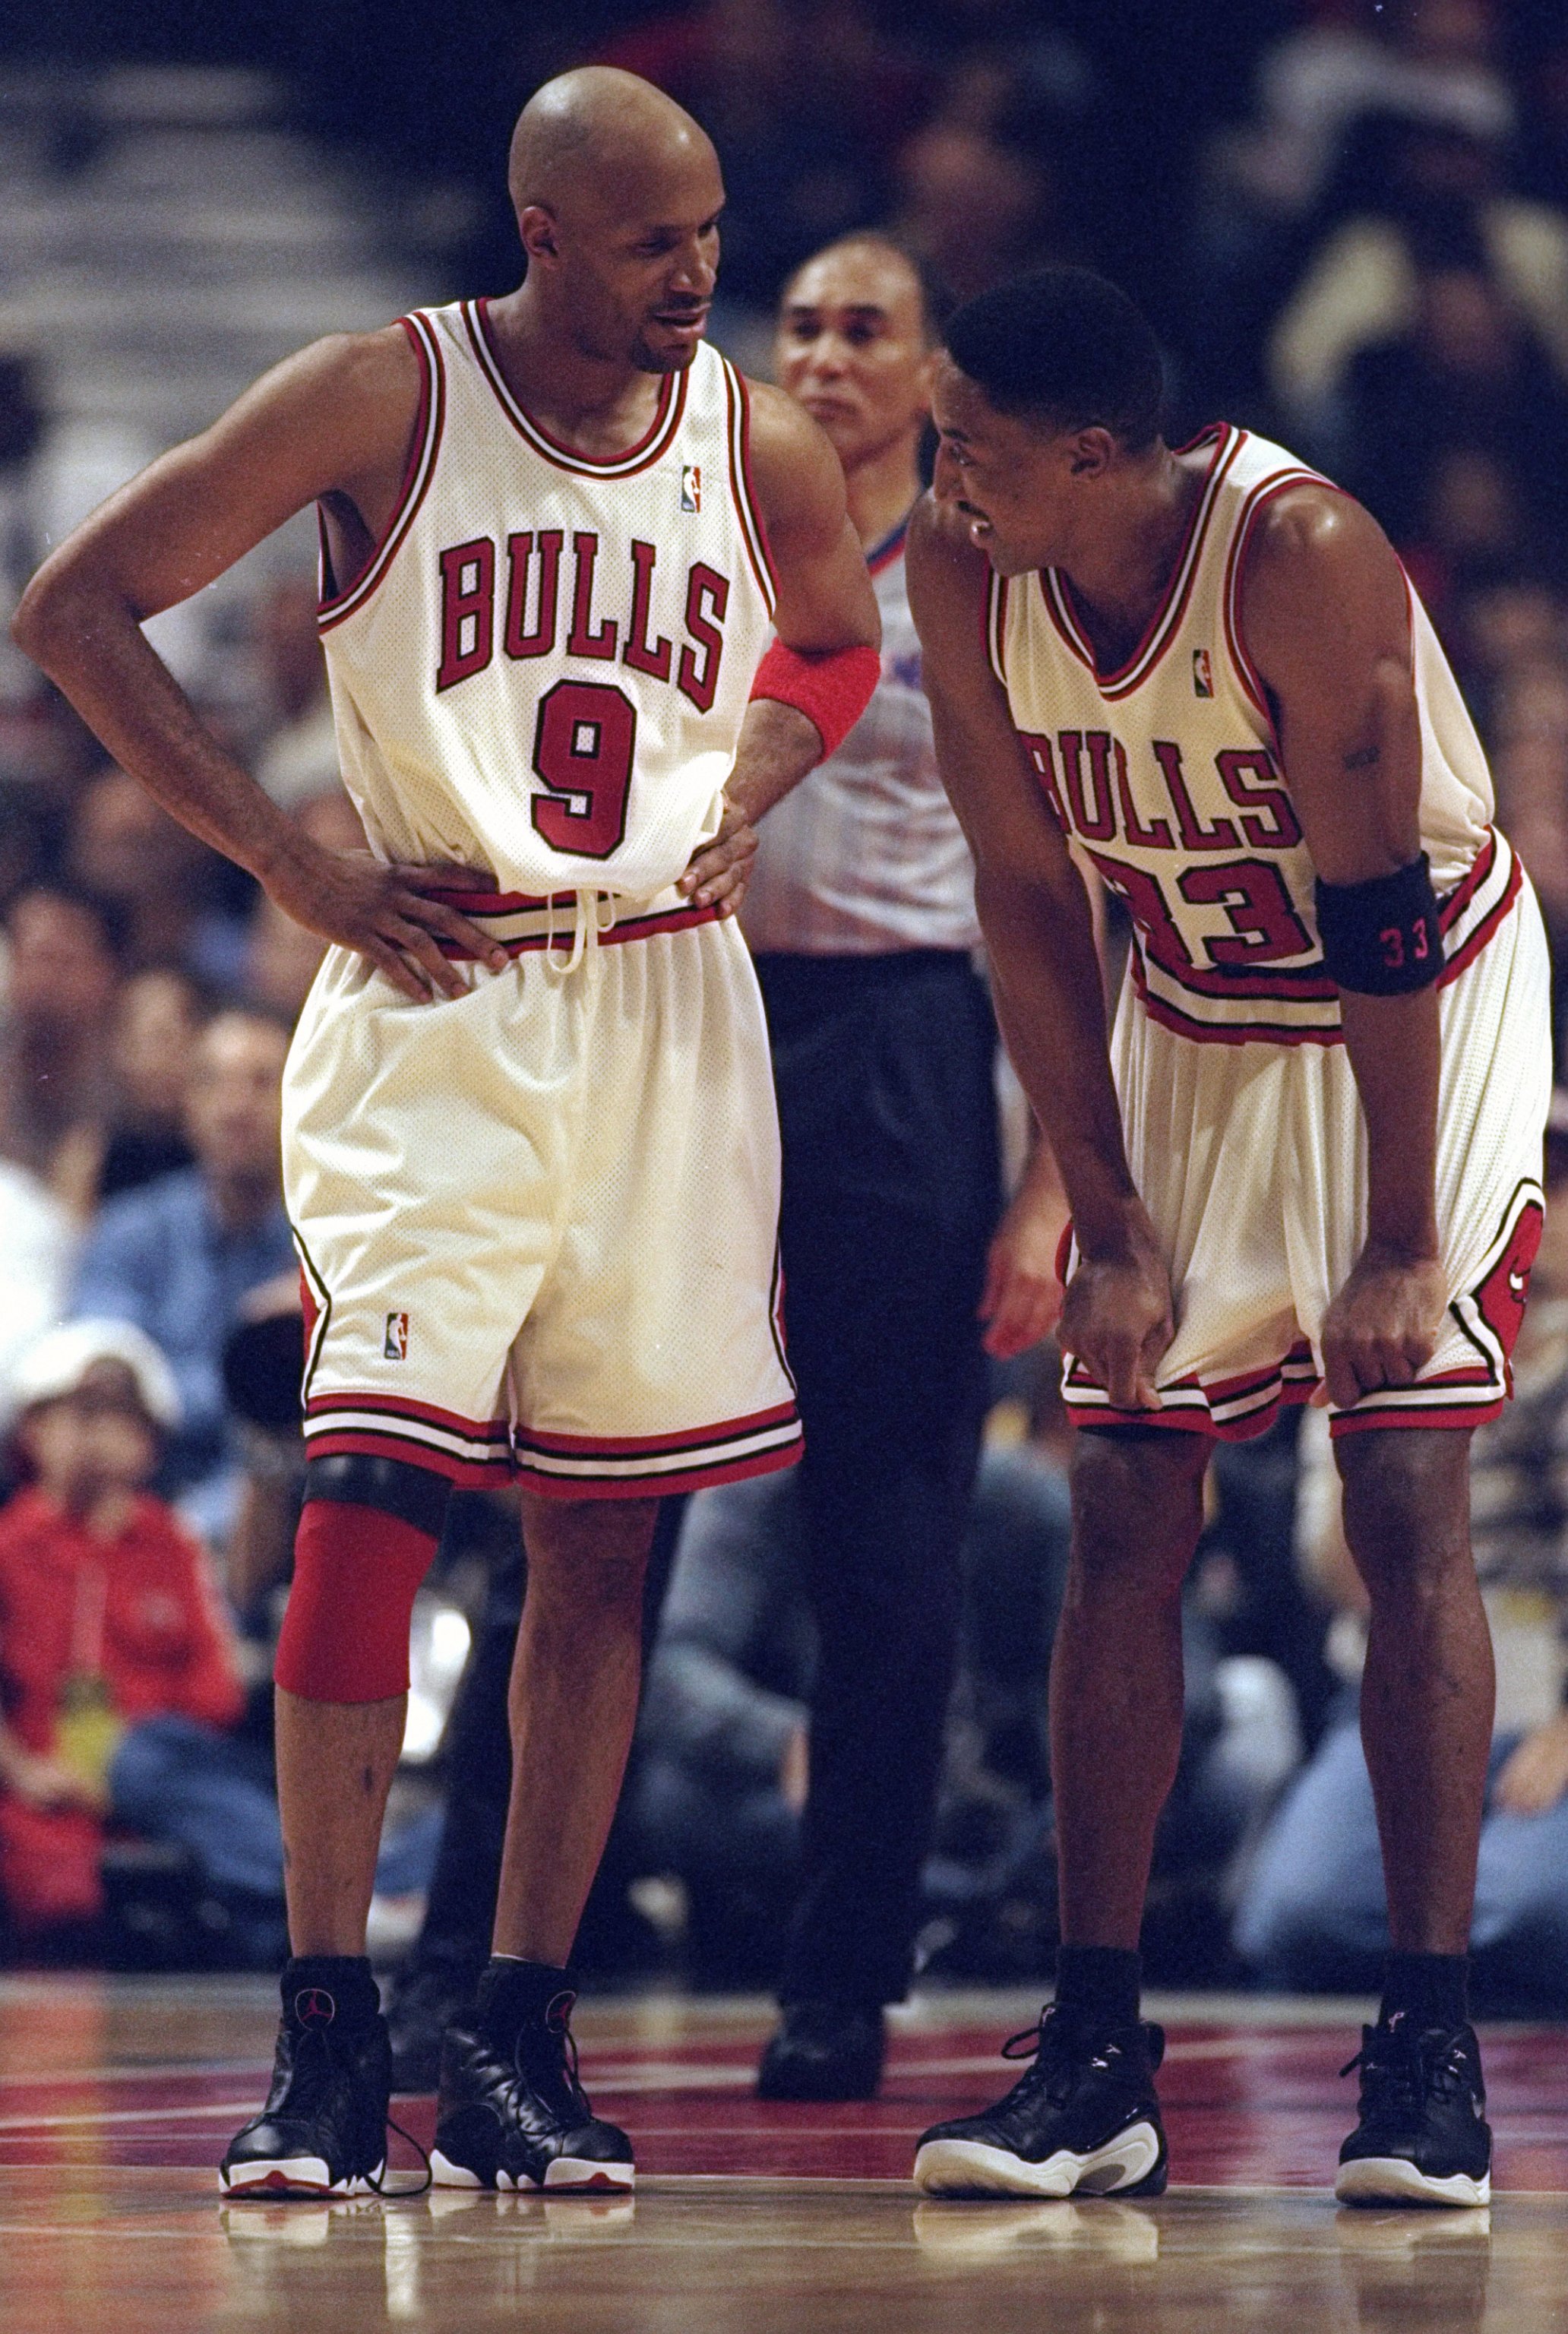 3 May 1998: Ron Harper #9 talks with Scottie Pippen #33 of the Chicago Bulls during the NBA Playoffs round 1 game against the Charlotte Hornets at the United Center in Chicago, Illinois. The Bulls defeated the Hornets 83-70.